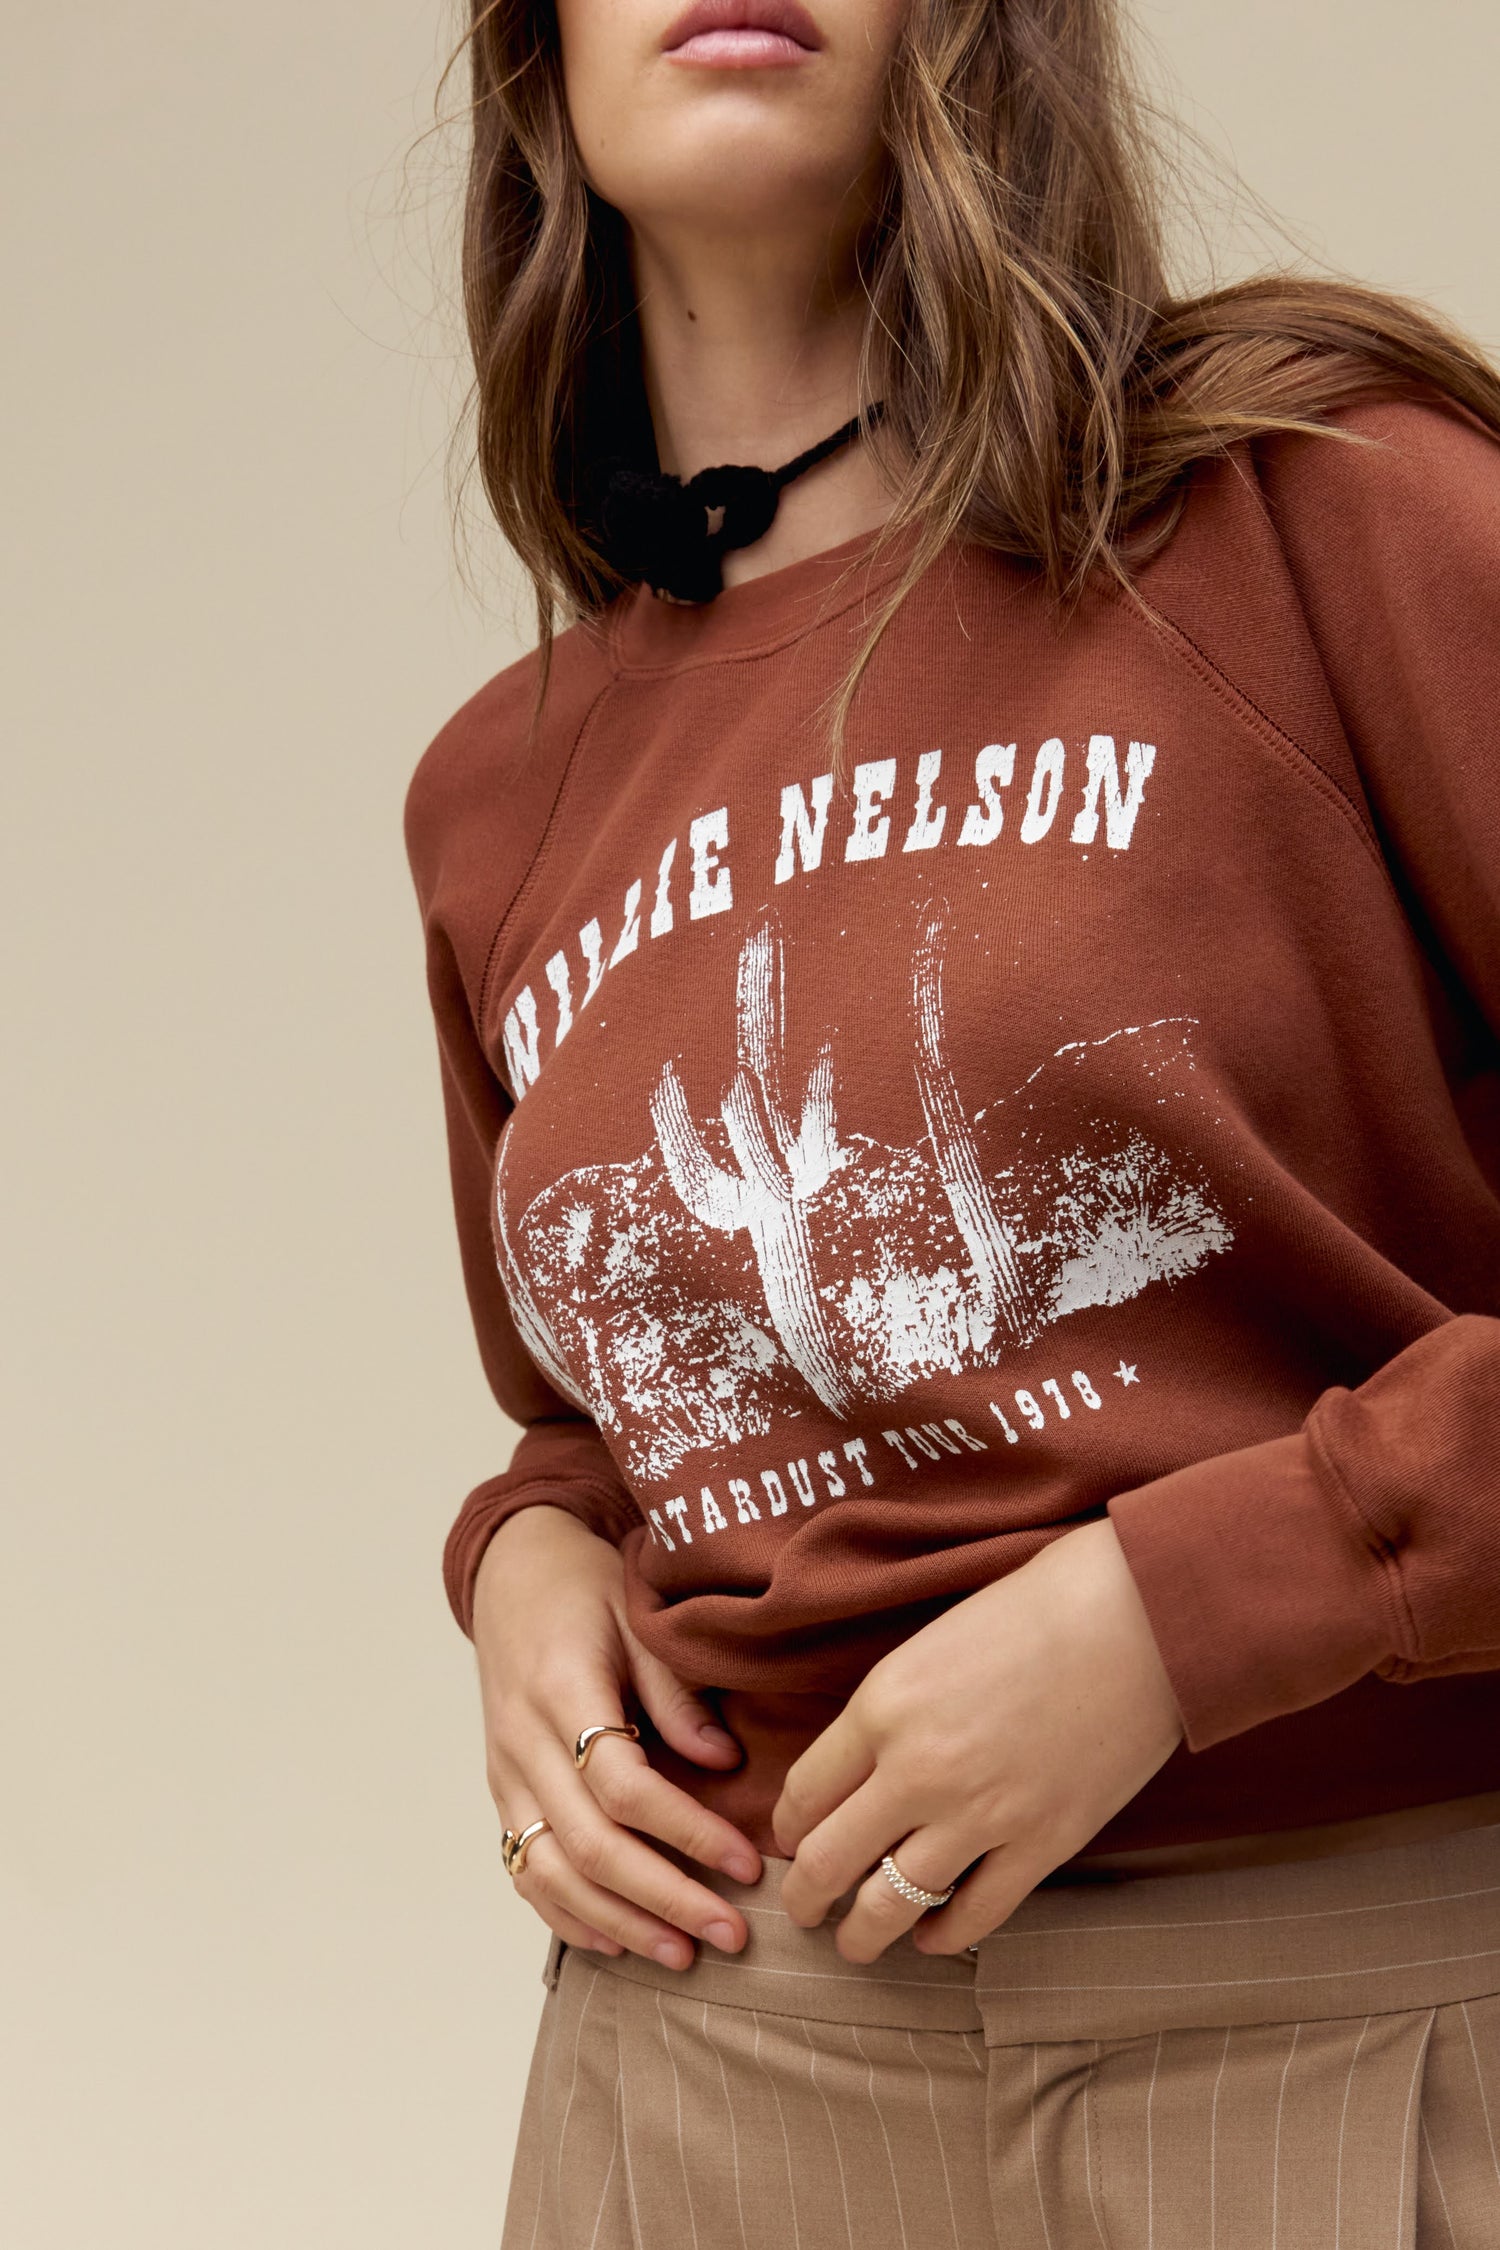 A model featuring a sable long sleeve stamped with Willie Nelson in white large font.